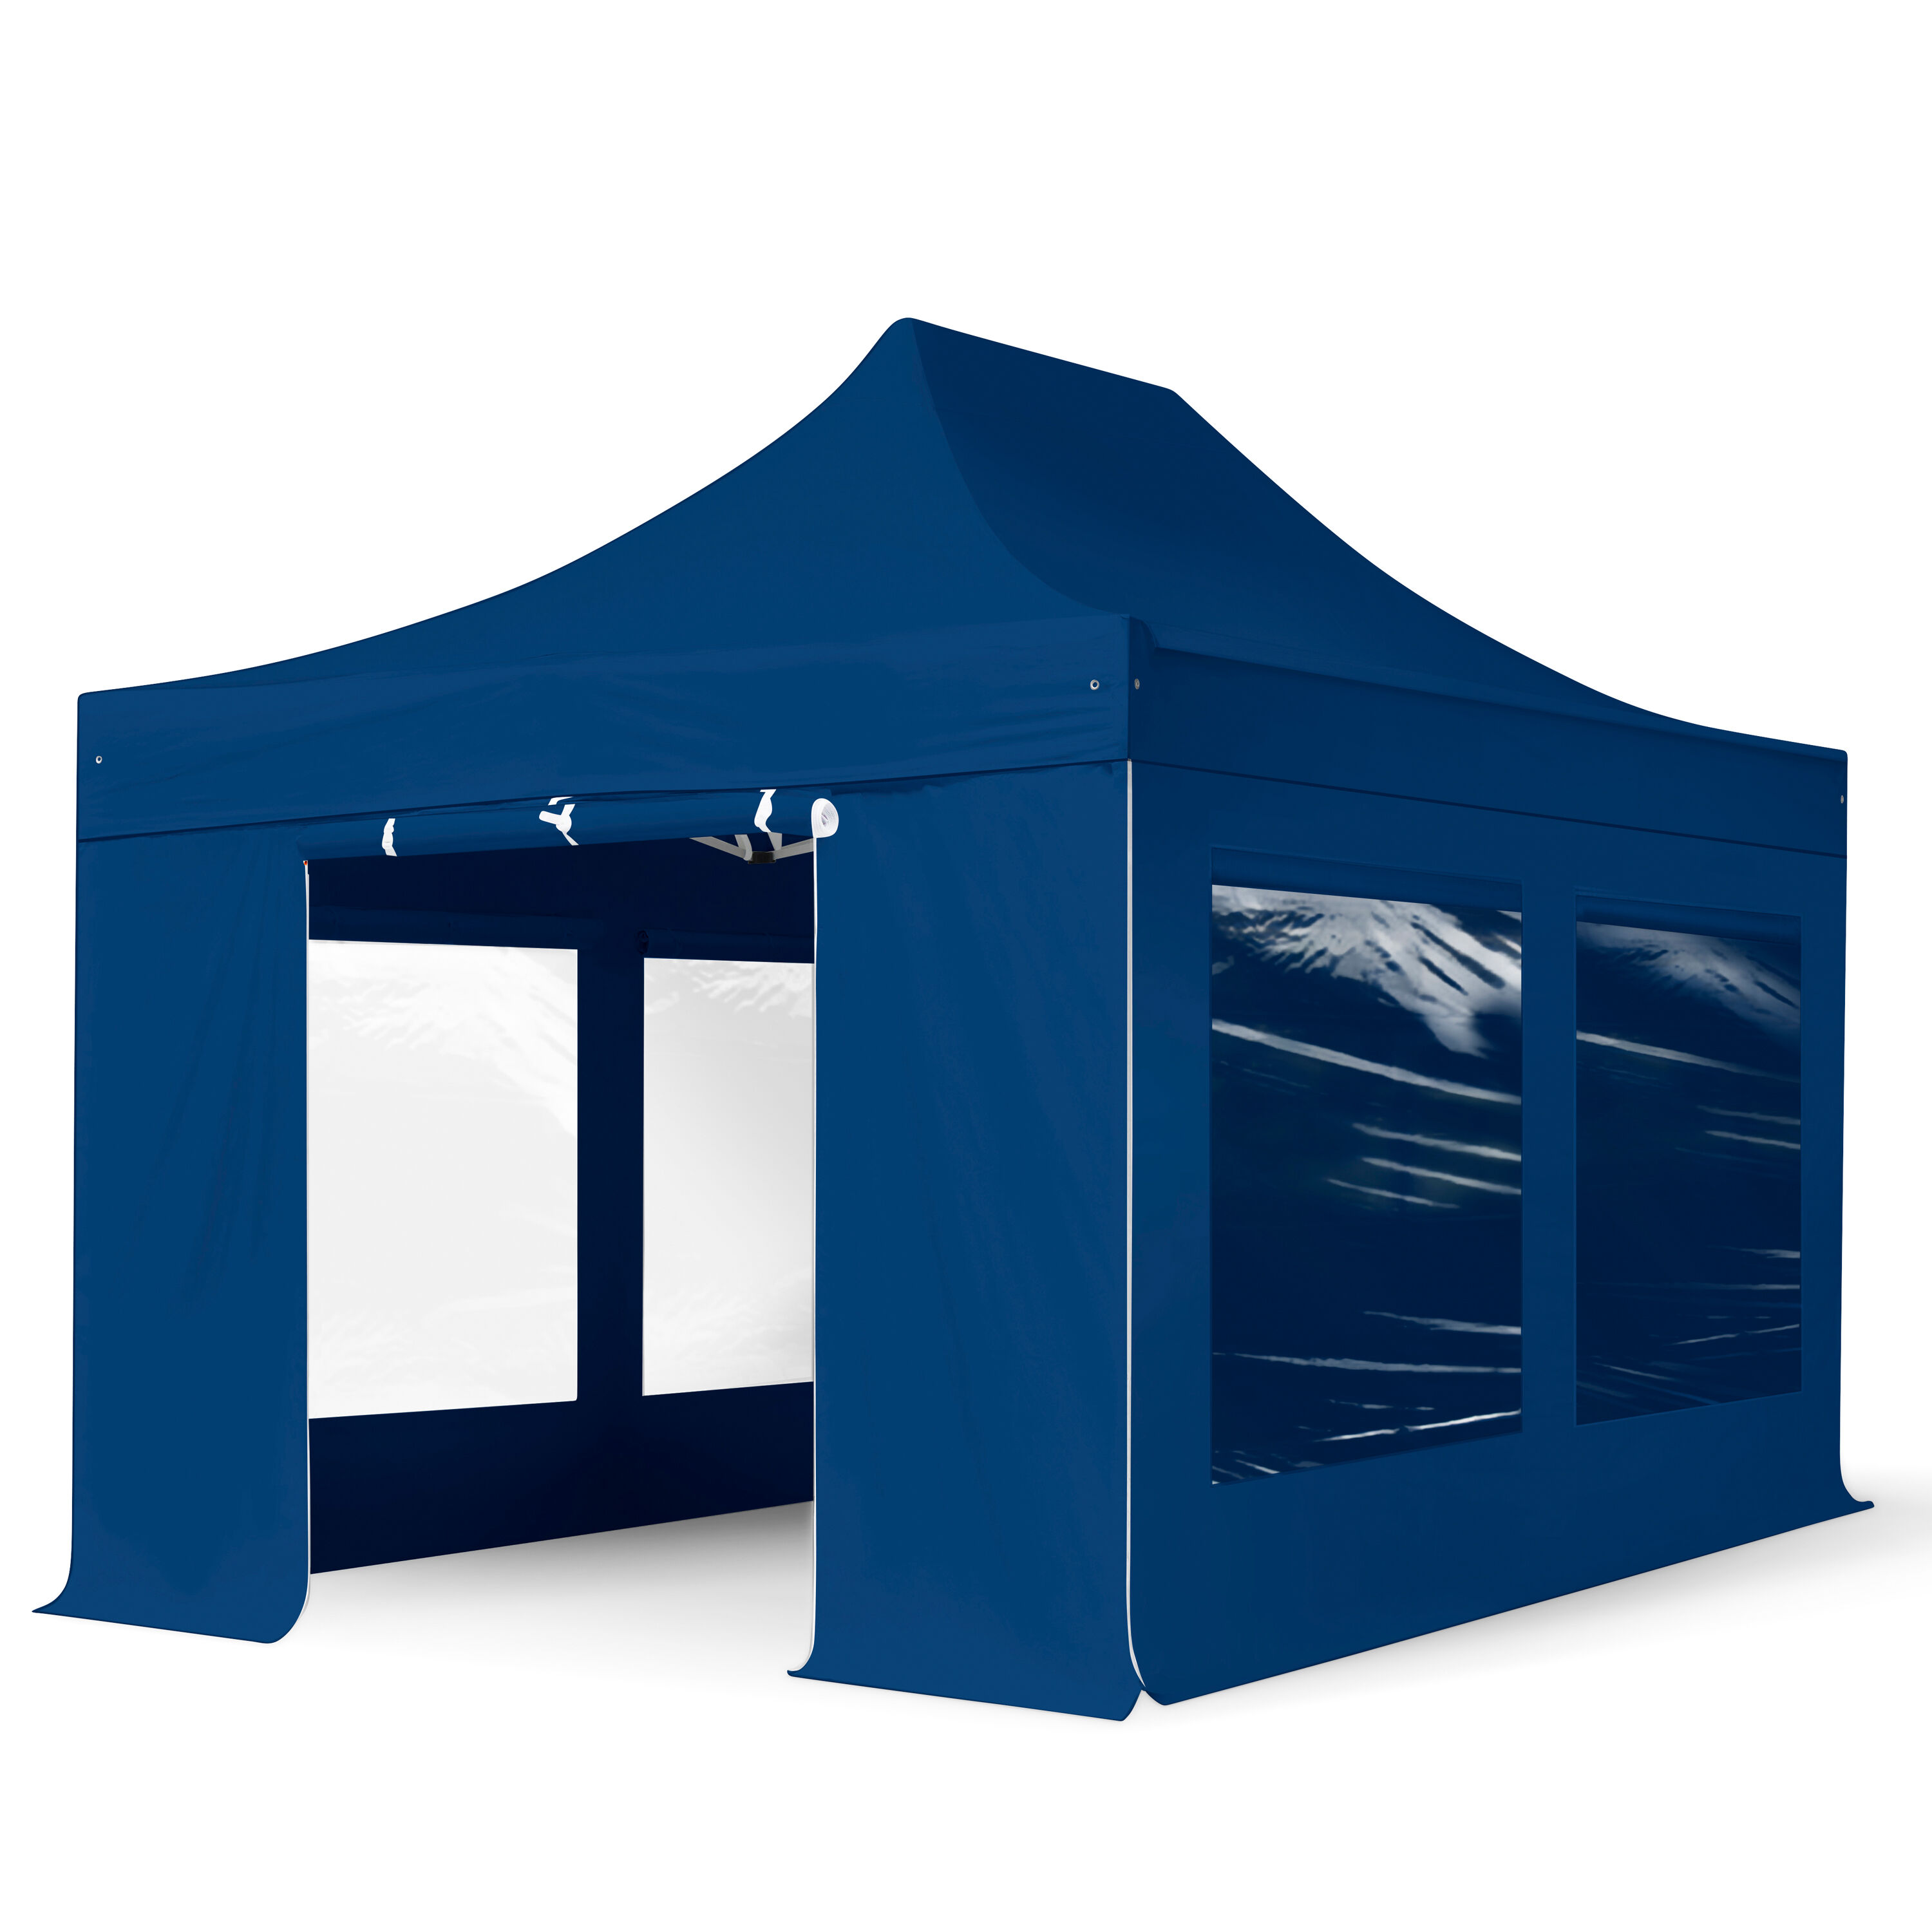 TOOLPORT Easy up Partytent 3x4,5m Hoogwaardig polyester 400 g/m² blauw waterdicht Easy Up Tent, Pop Up Partytent, Harmonicatent, Vouwtent